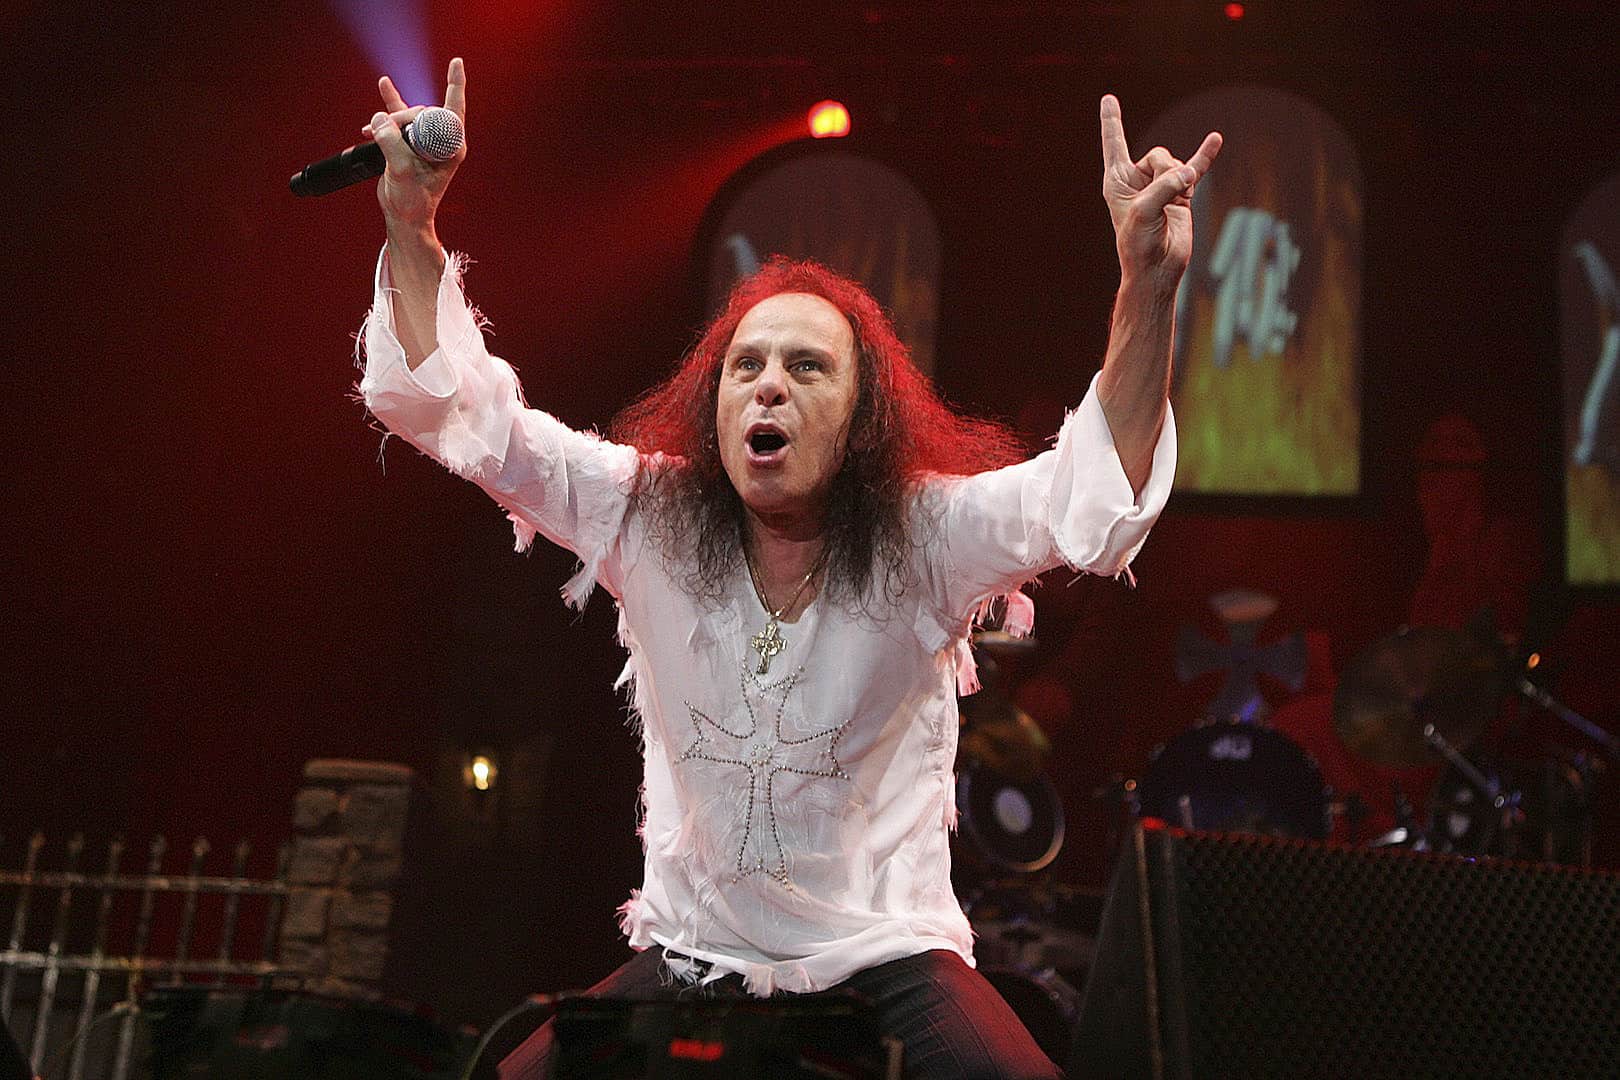 ronnie james dio autobiography, Further Details Revealed For RONNIE JAMES DIO’s ‘Rainbow In The Dark’ Autobiography